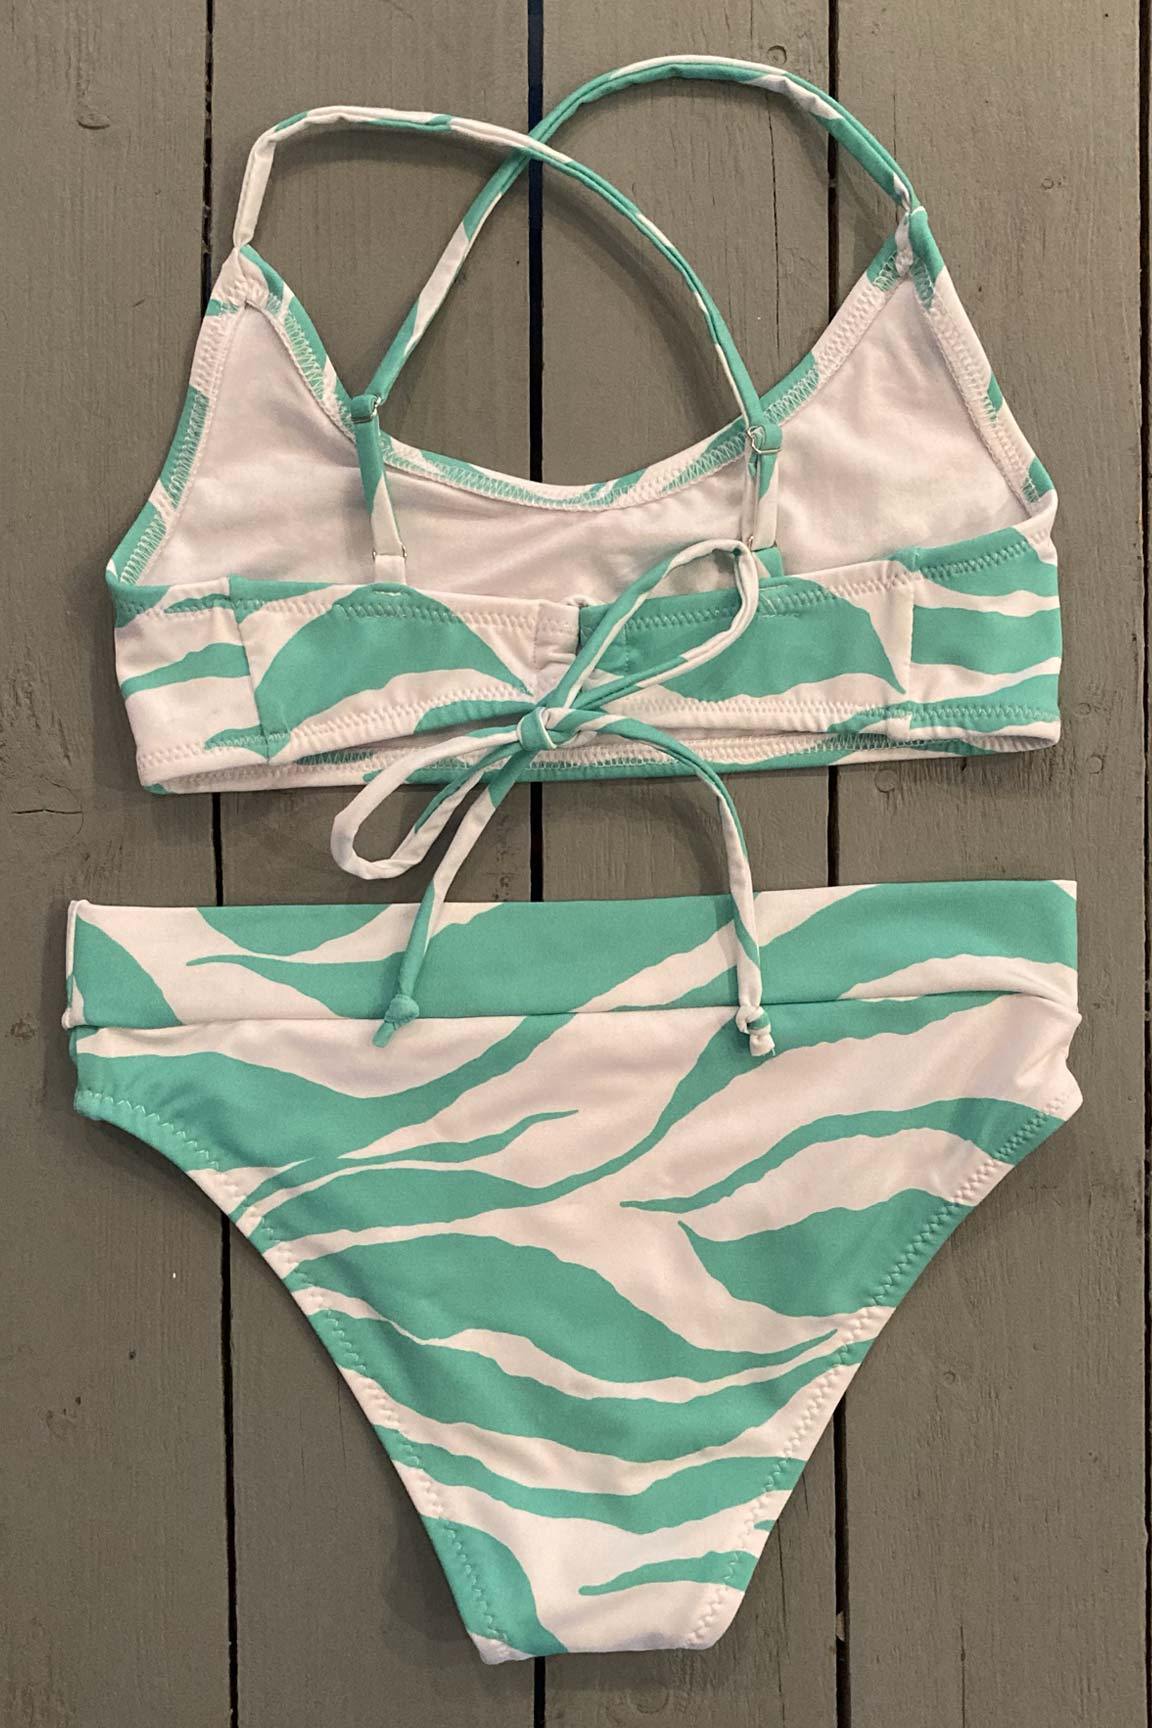 Adorable kids animal print bralette swimsuit. Top is adjustable and bottoms have a high, wide band bottom. They are made with the finest quality of soft and stretchy Lycra to achieve the best fit. @JillesBikinis